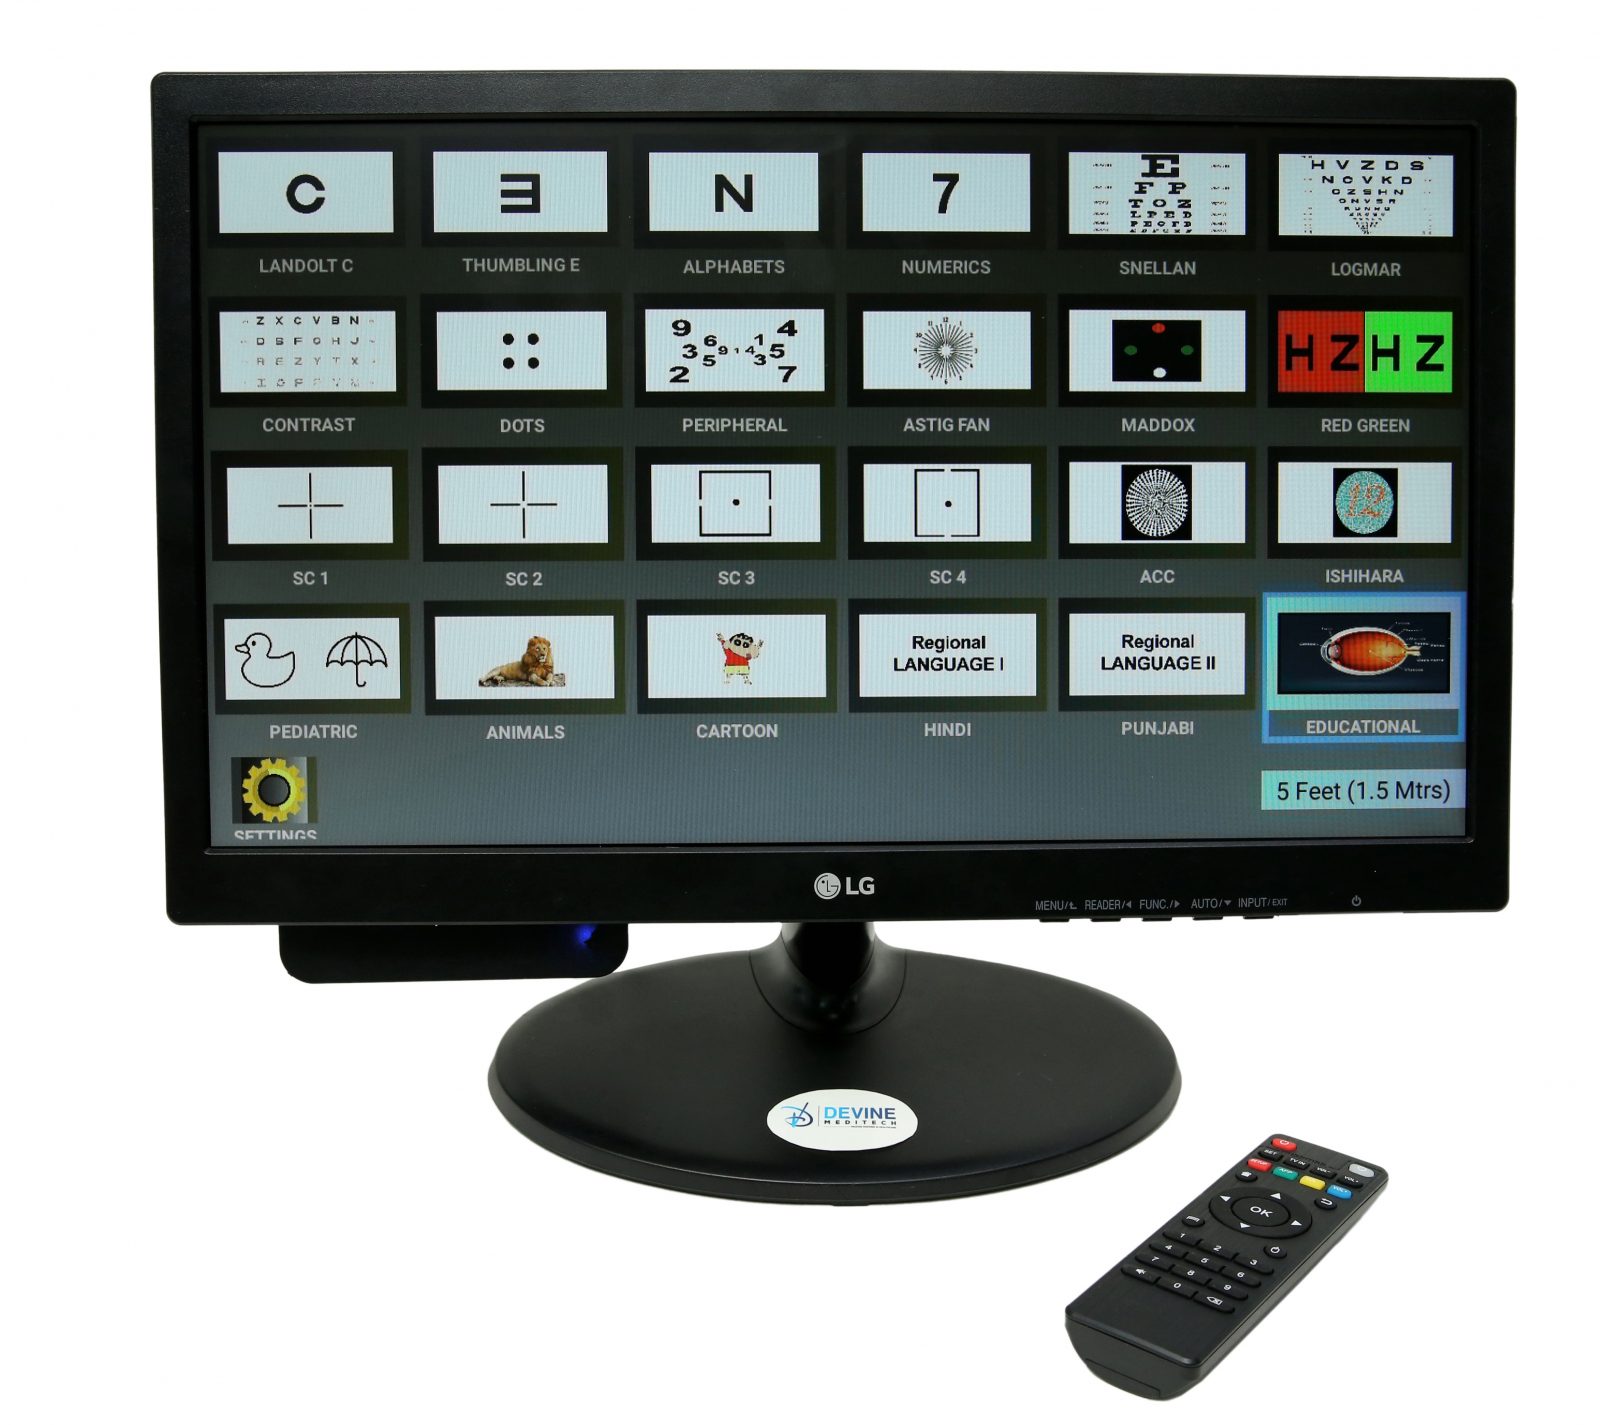 LCD Auto Chart System with remote